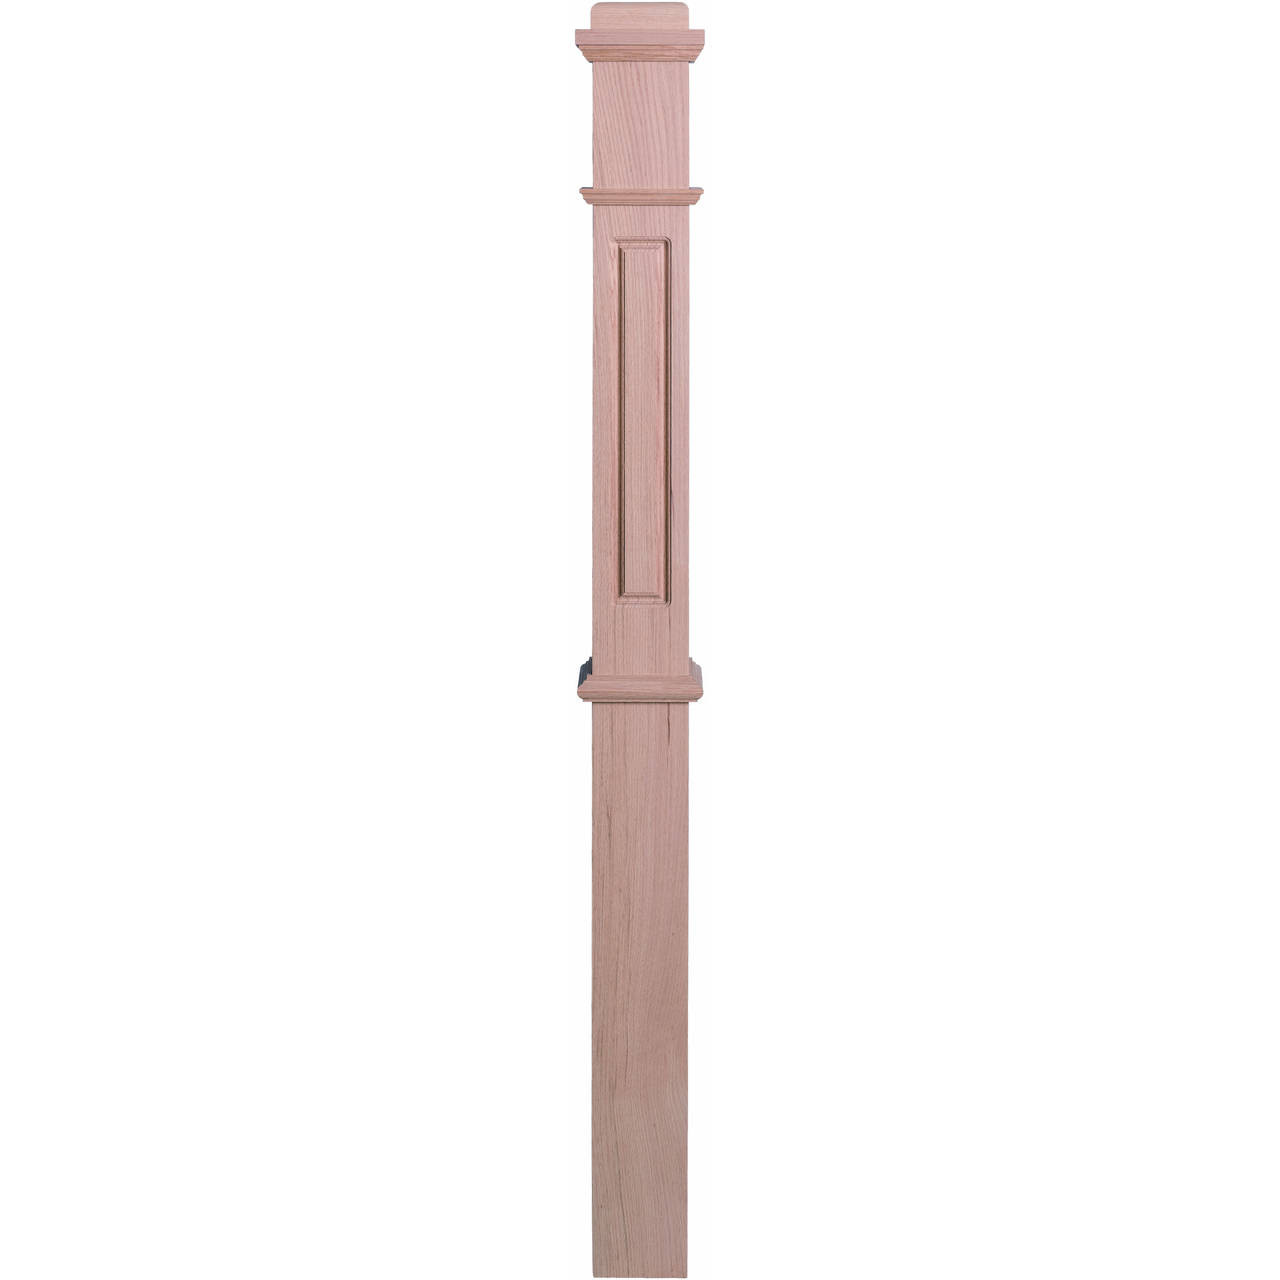 RP-4375 Primed with Special Species Trim Raised Panel Box Newel Post (2)